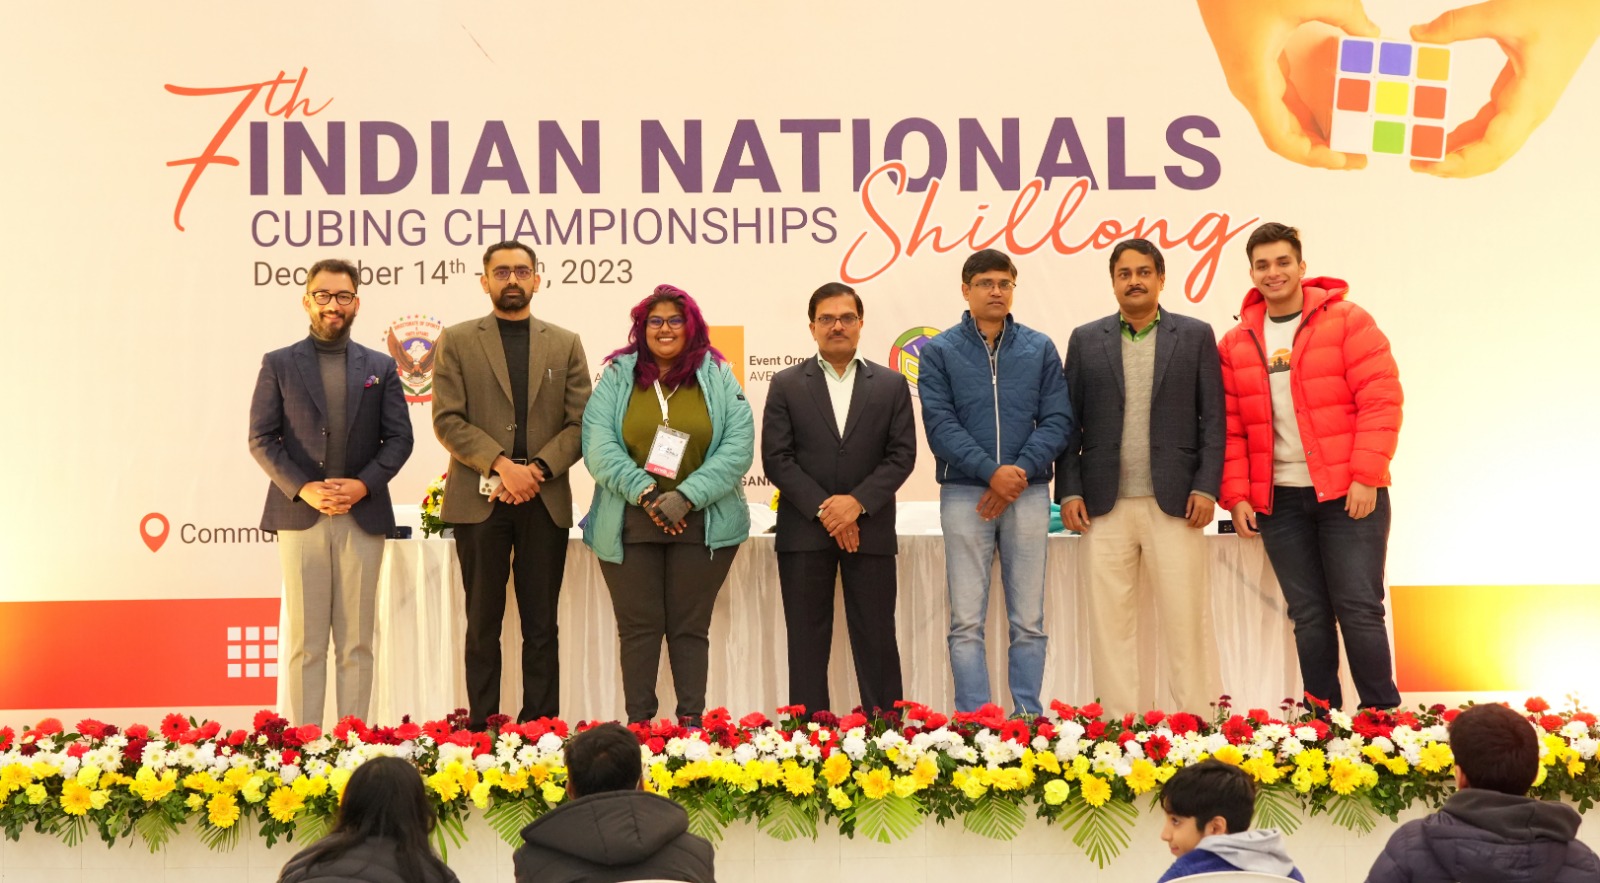 7th Indian Nationals 2023 Cubing Championships underway in Shillong